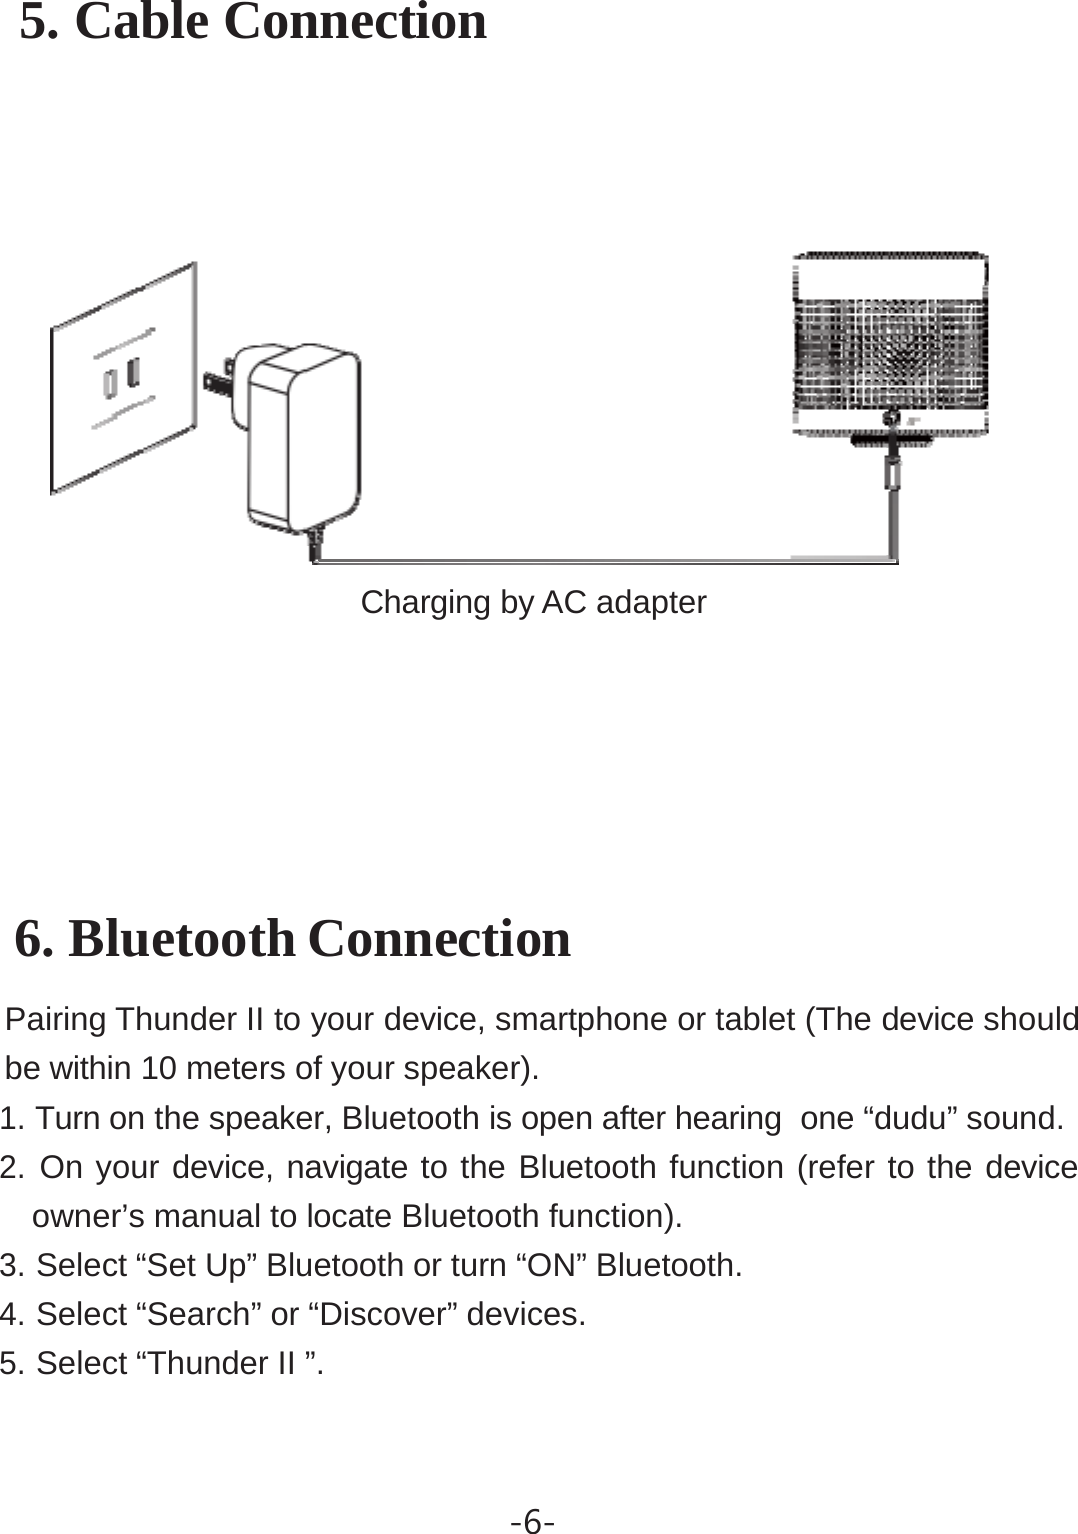 -6- 5. Cable Connection          Charging by AC adapter      6. Bluetooth Connection       Pairing Thunder II to your device, smartphone or tablet (The device should be within 10 meters of your speaker). 1. Turn on the speaker, Bluetooth is open after hearing  one “dudu” sound. 2. On your device, navigate to the Bluetooth function (refer to the device owner’s manual to locate Bluetooth function). 3. Select “Set Up” Bluetooth or turn “ON” Bluetooth. 4. Select “Search” or “Discover” devices. 5. Select “Thunder II ”. 